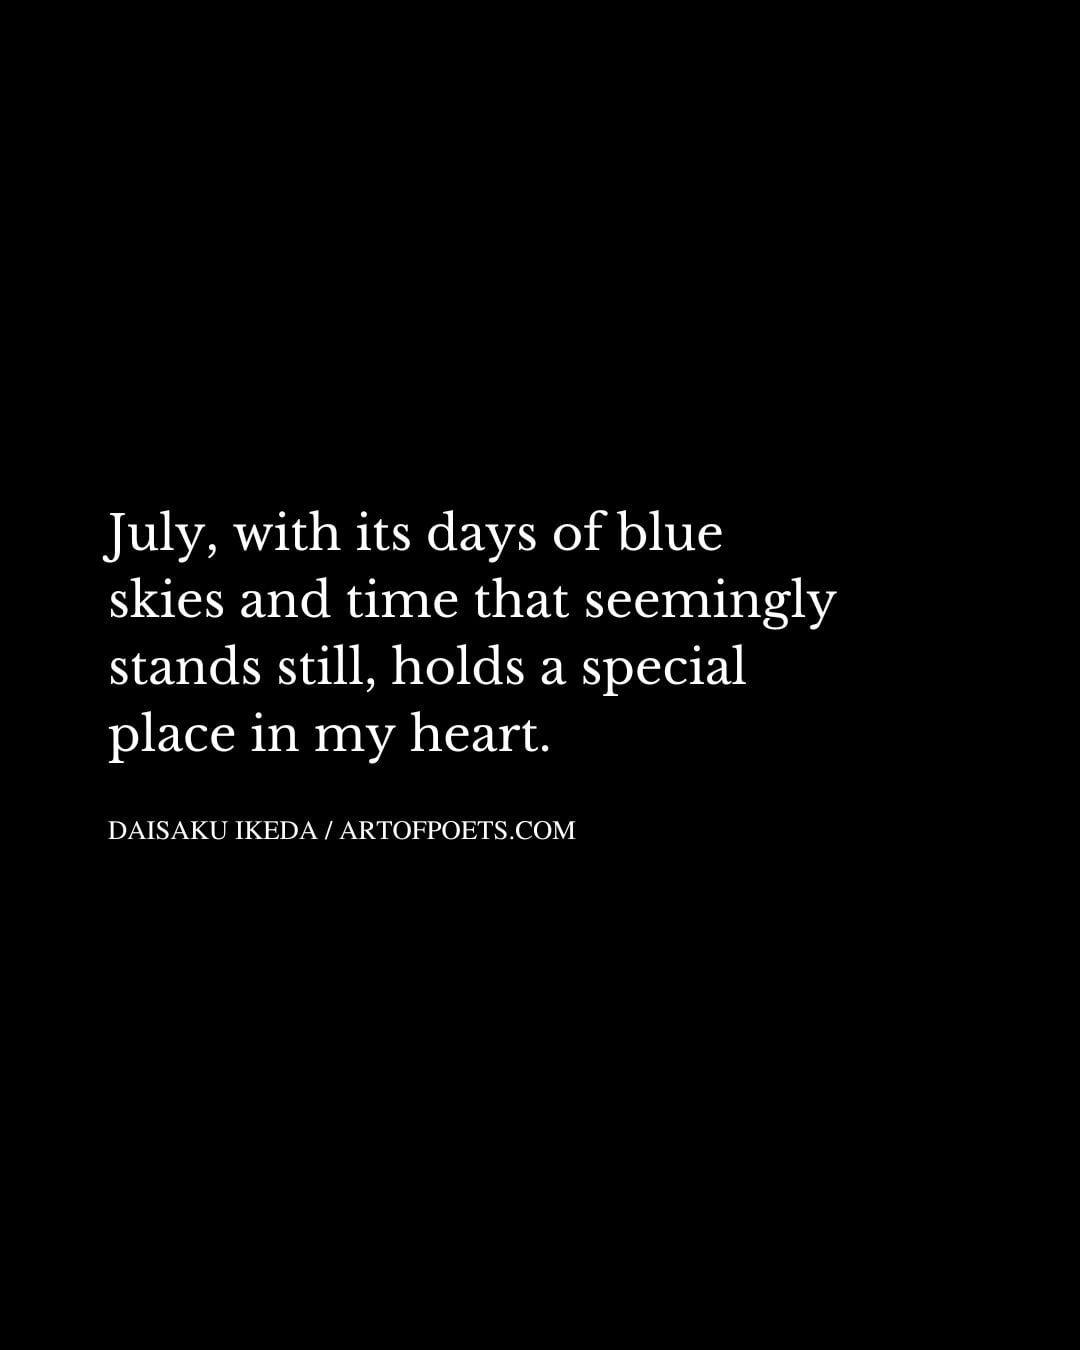 July with its days of blue skies and time that seemingly stands still holds a special place in my heart